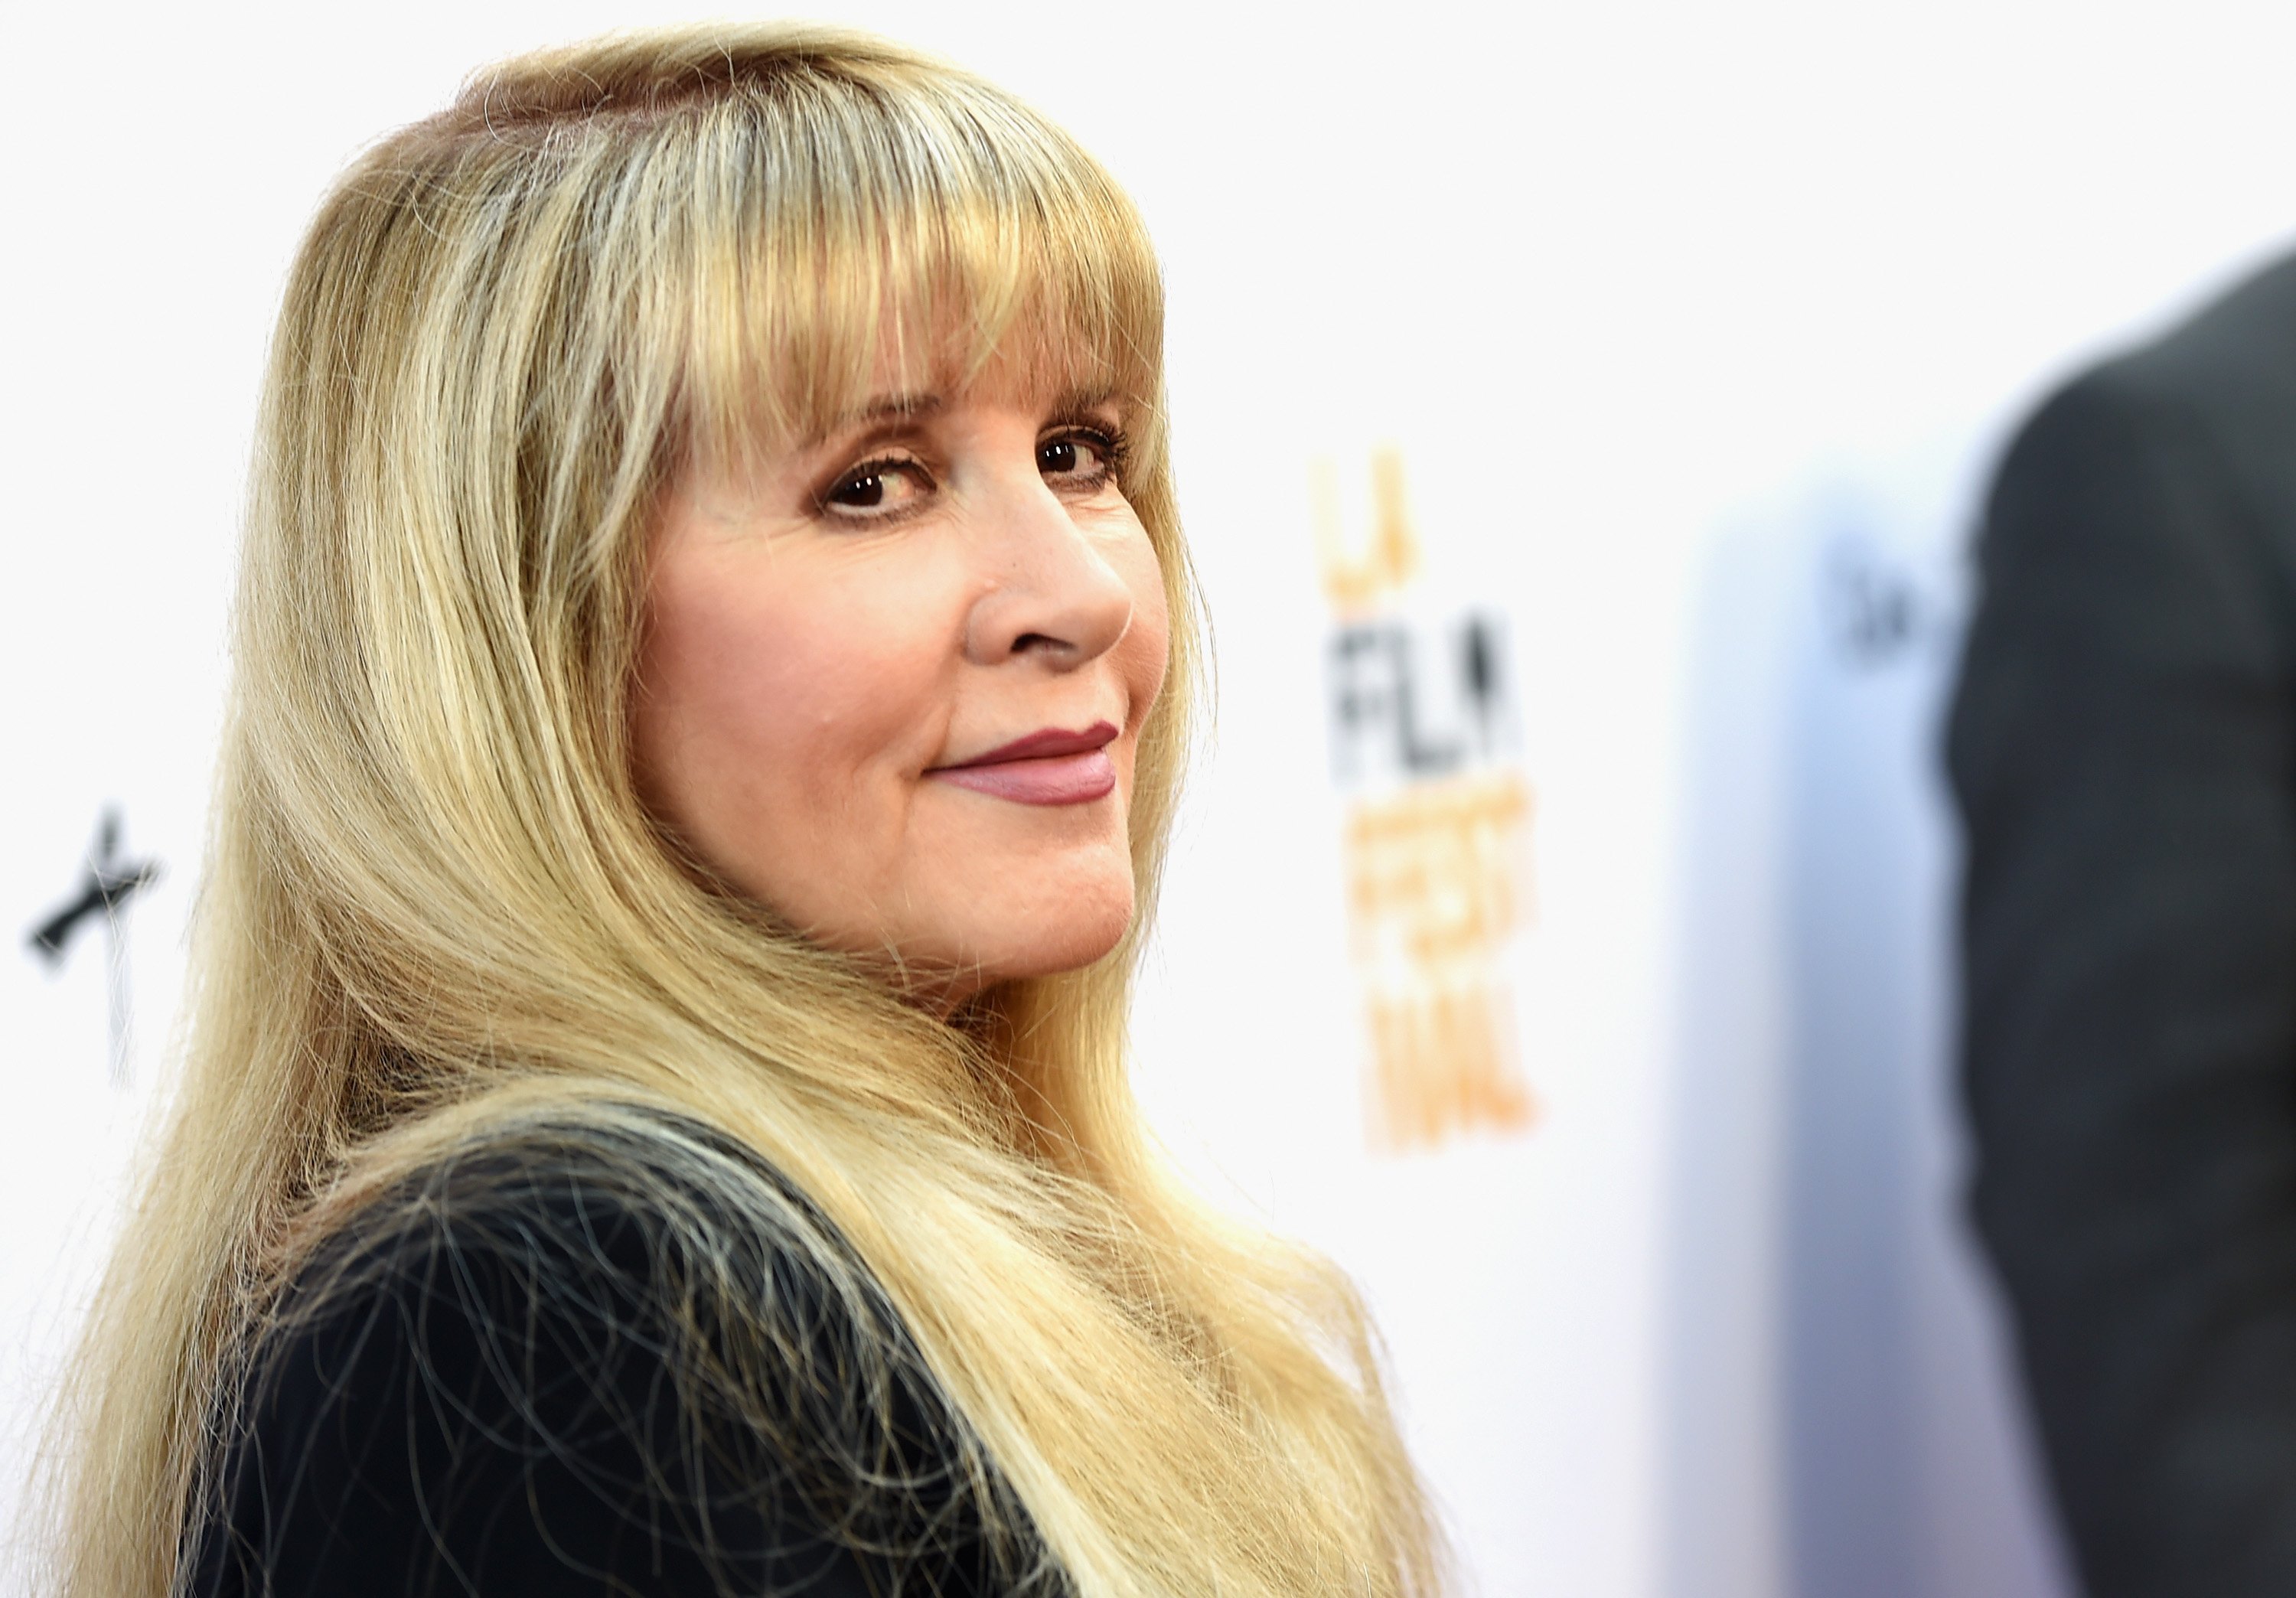 Stevie Nicks wears a black outfit against a white background.